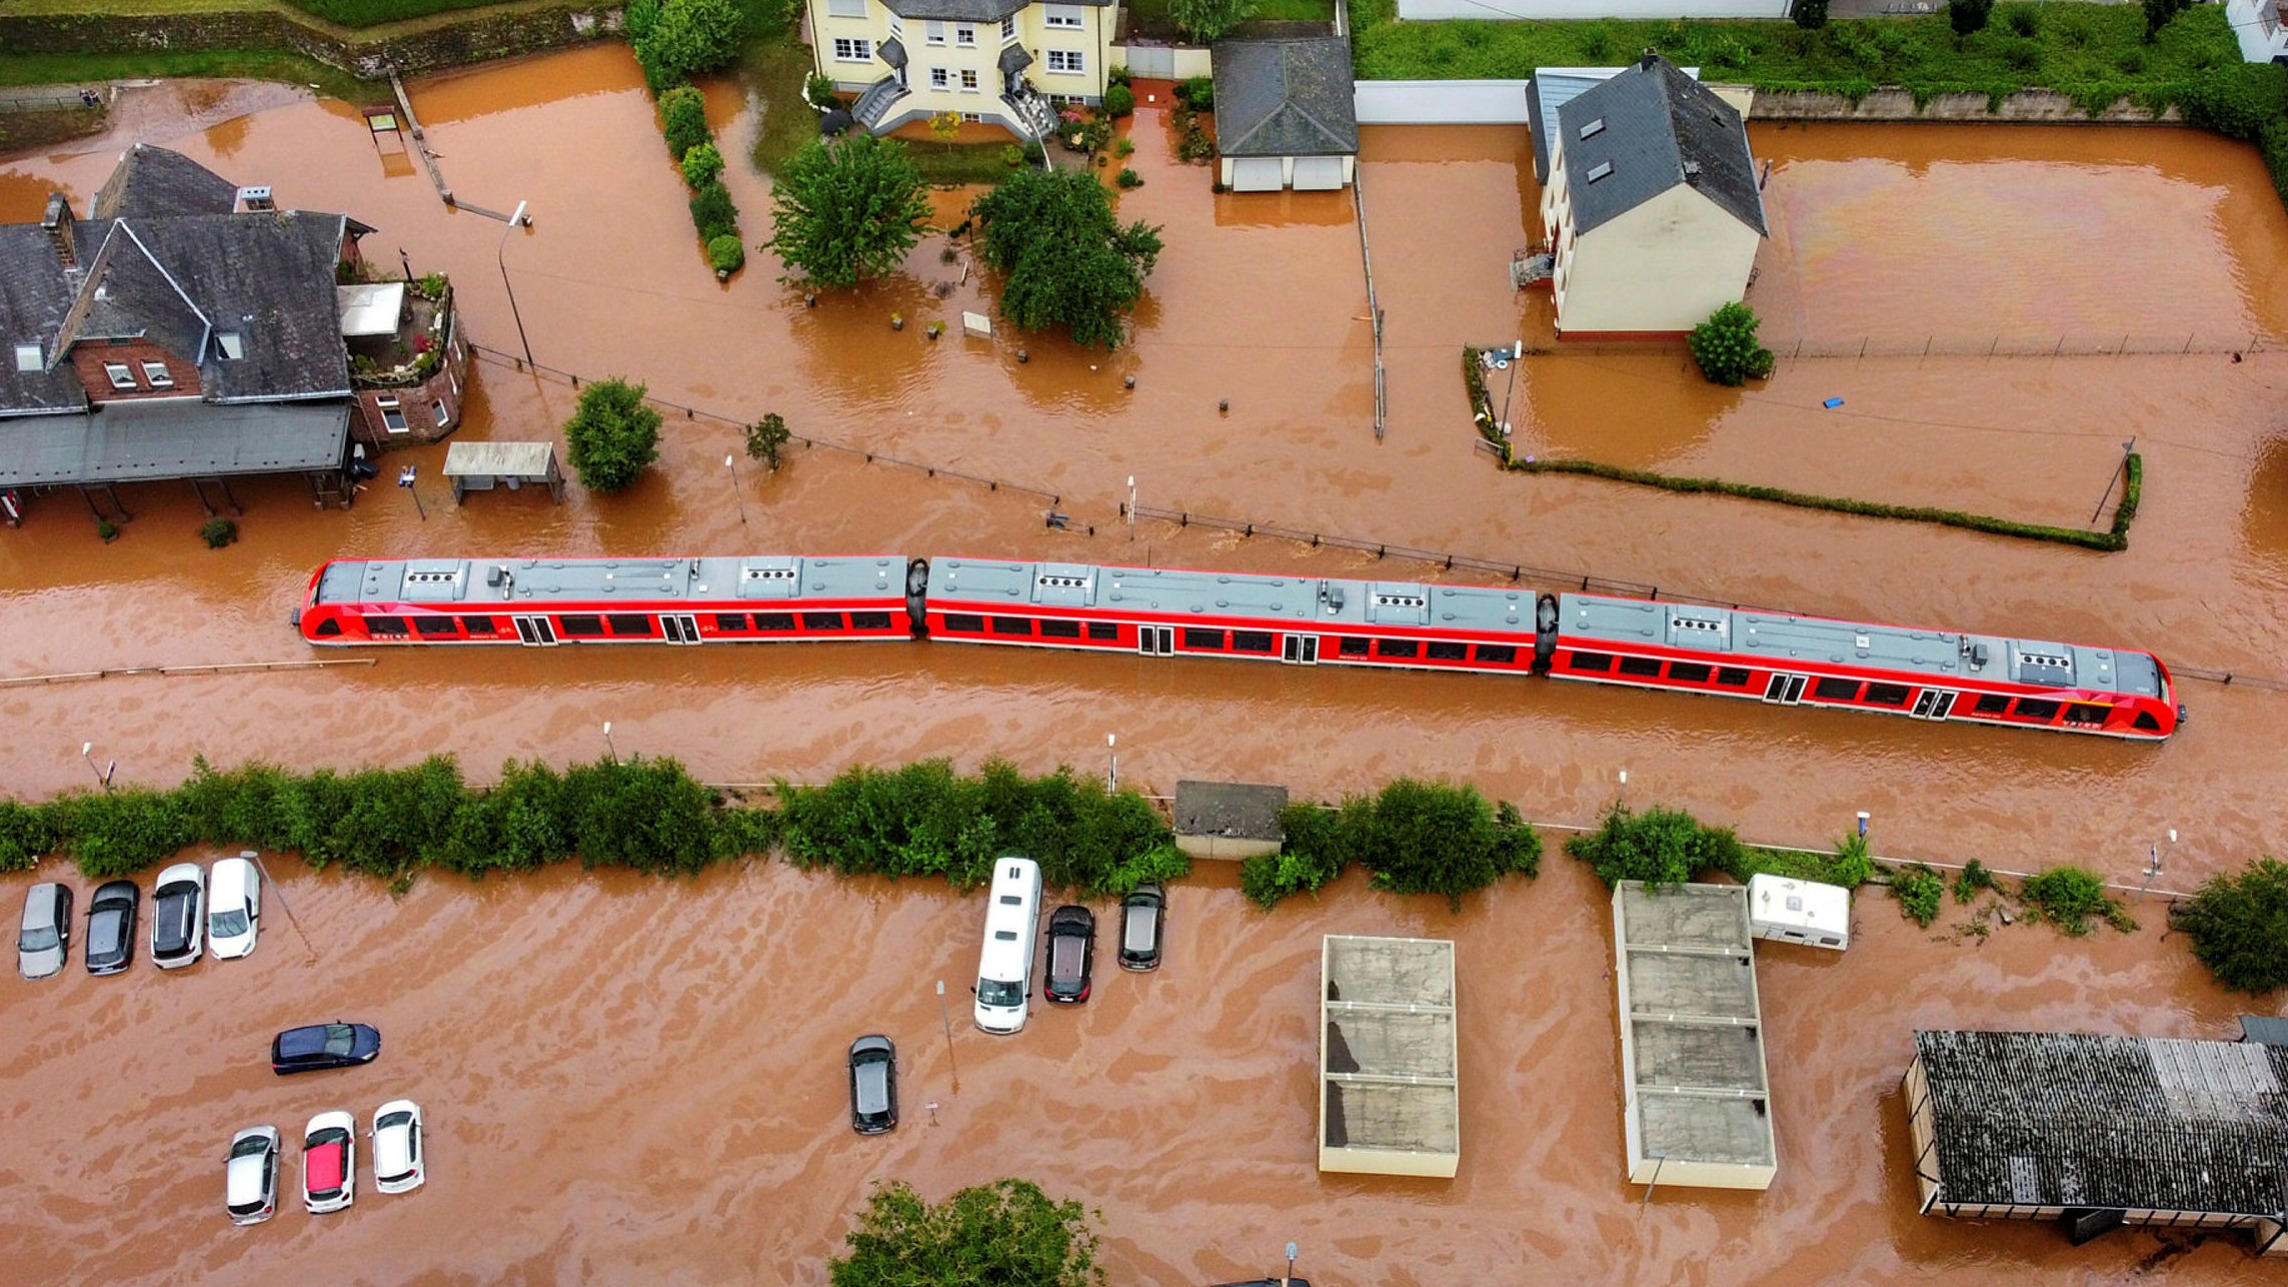 Flash floods killed 14 people in Johannesburg, South Africa